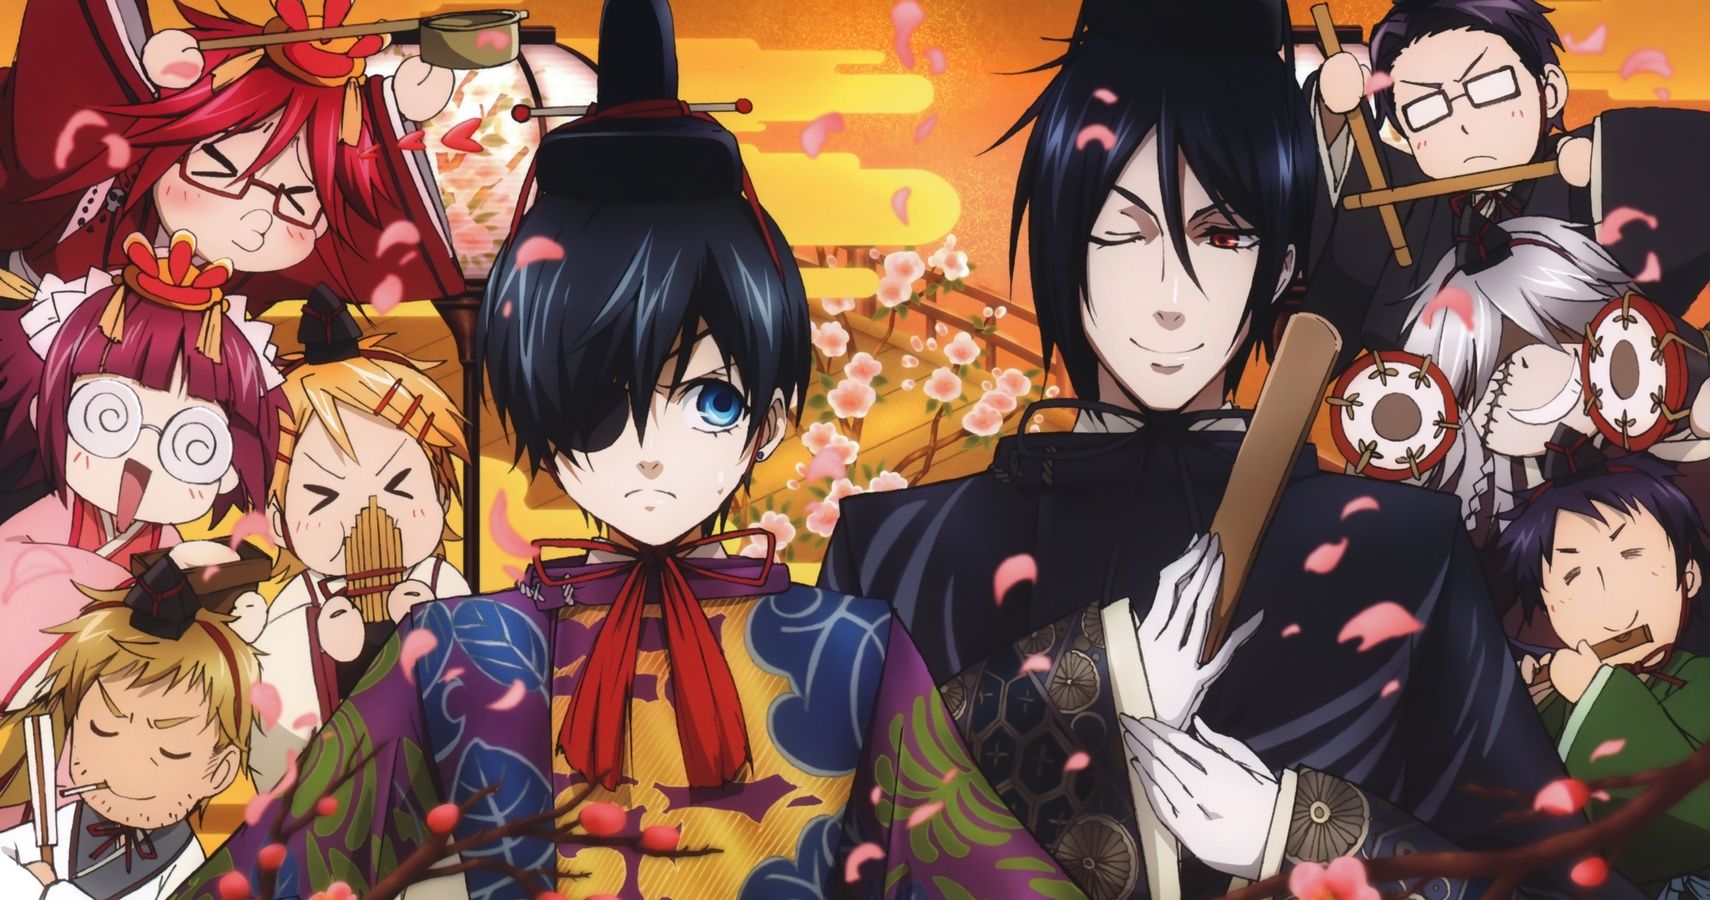 Of the you do think what characters black butler Black Butler: